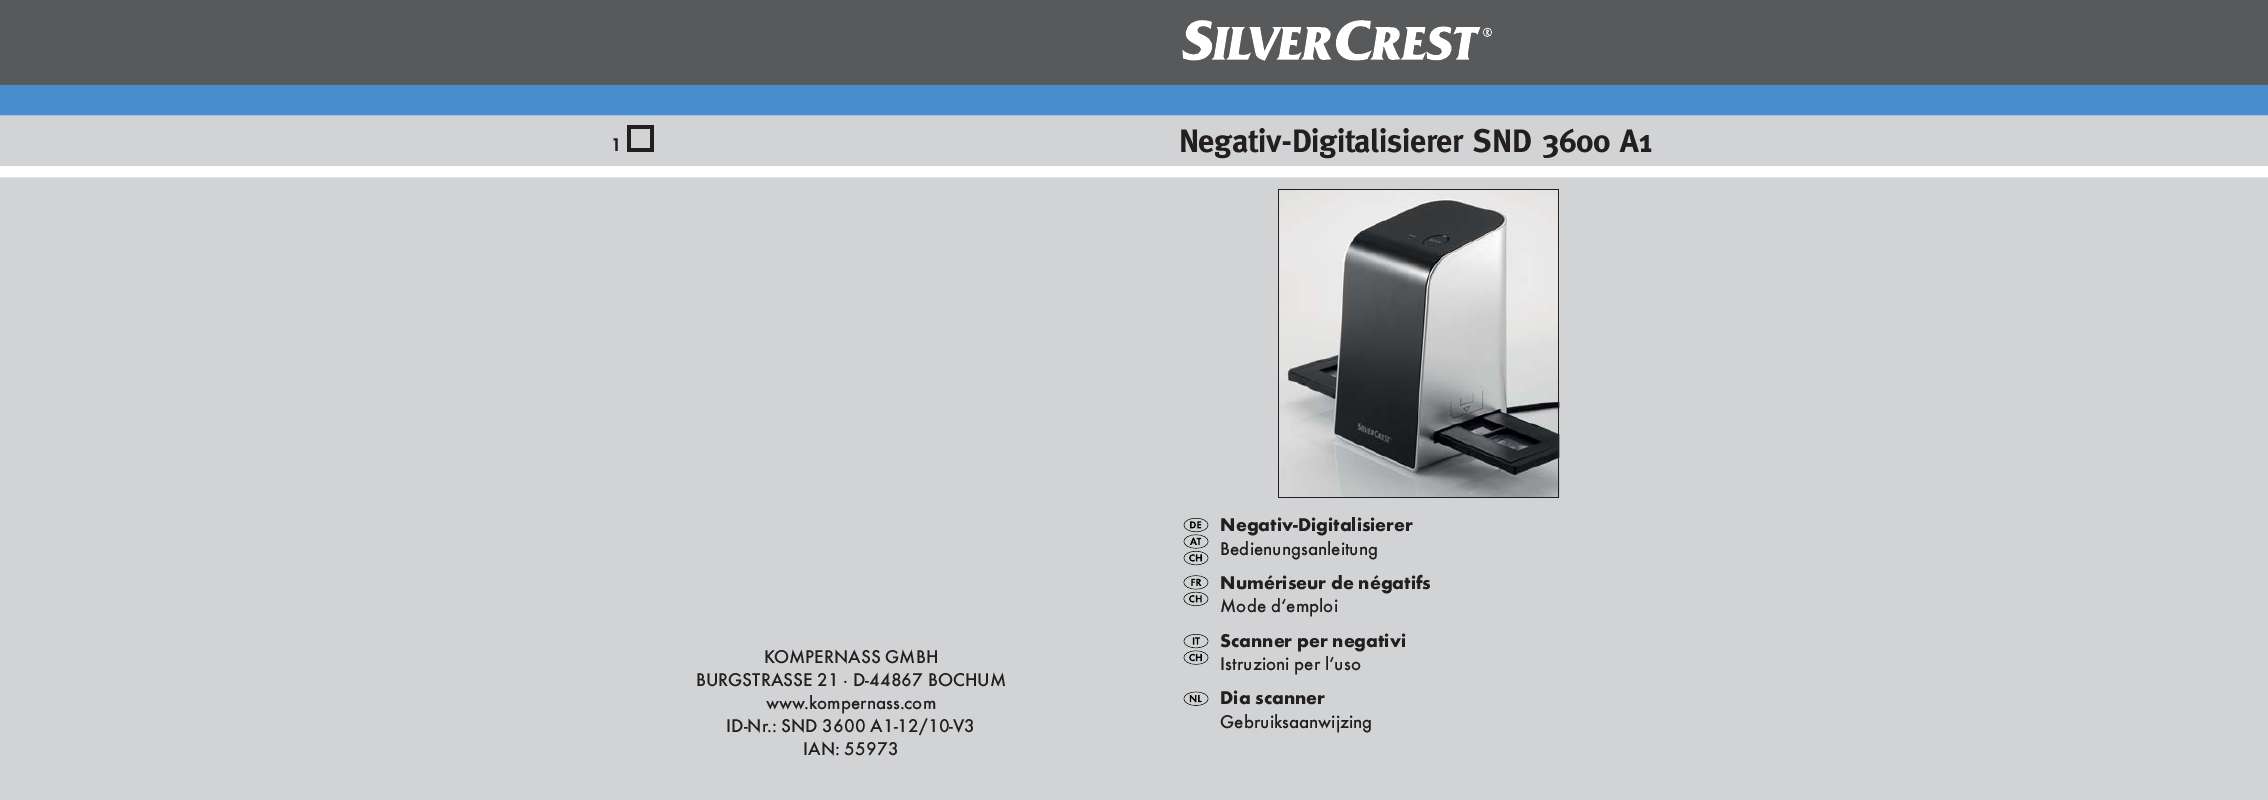 Silvercrest snd 3600 a1 driver for mac